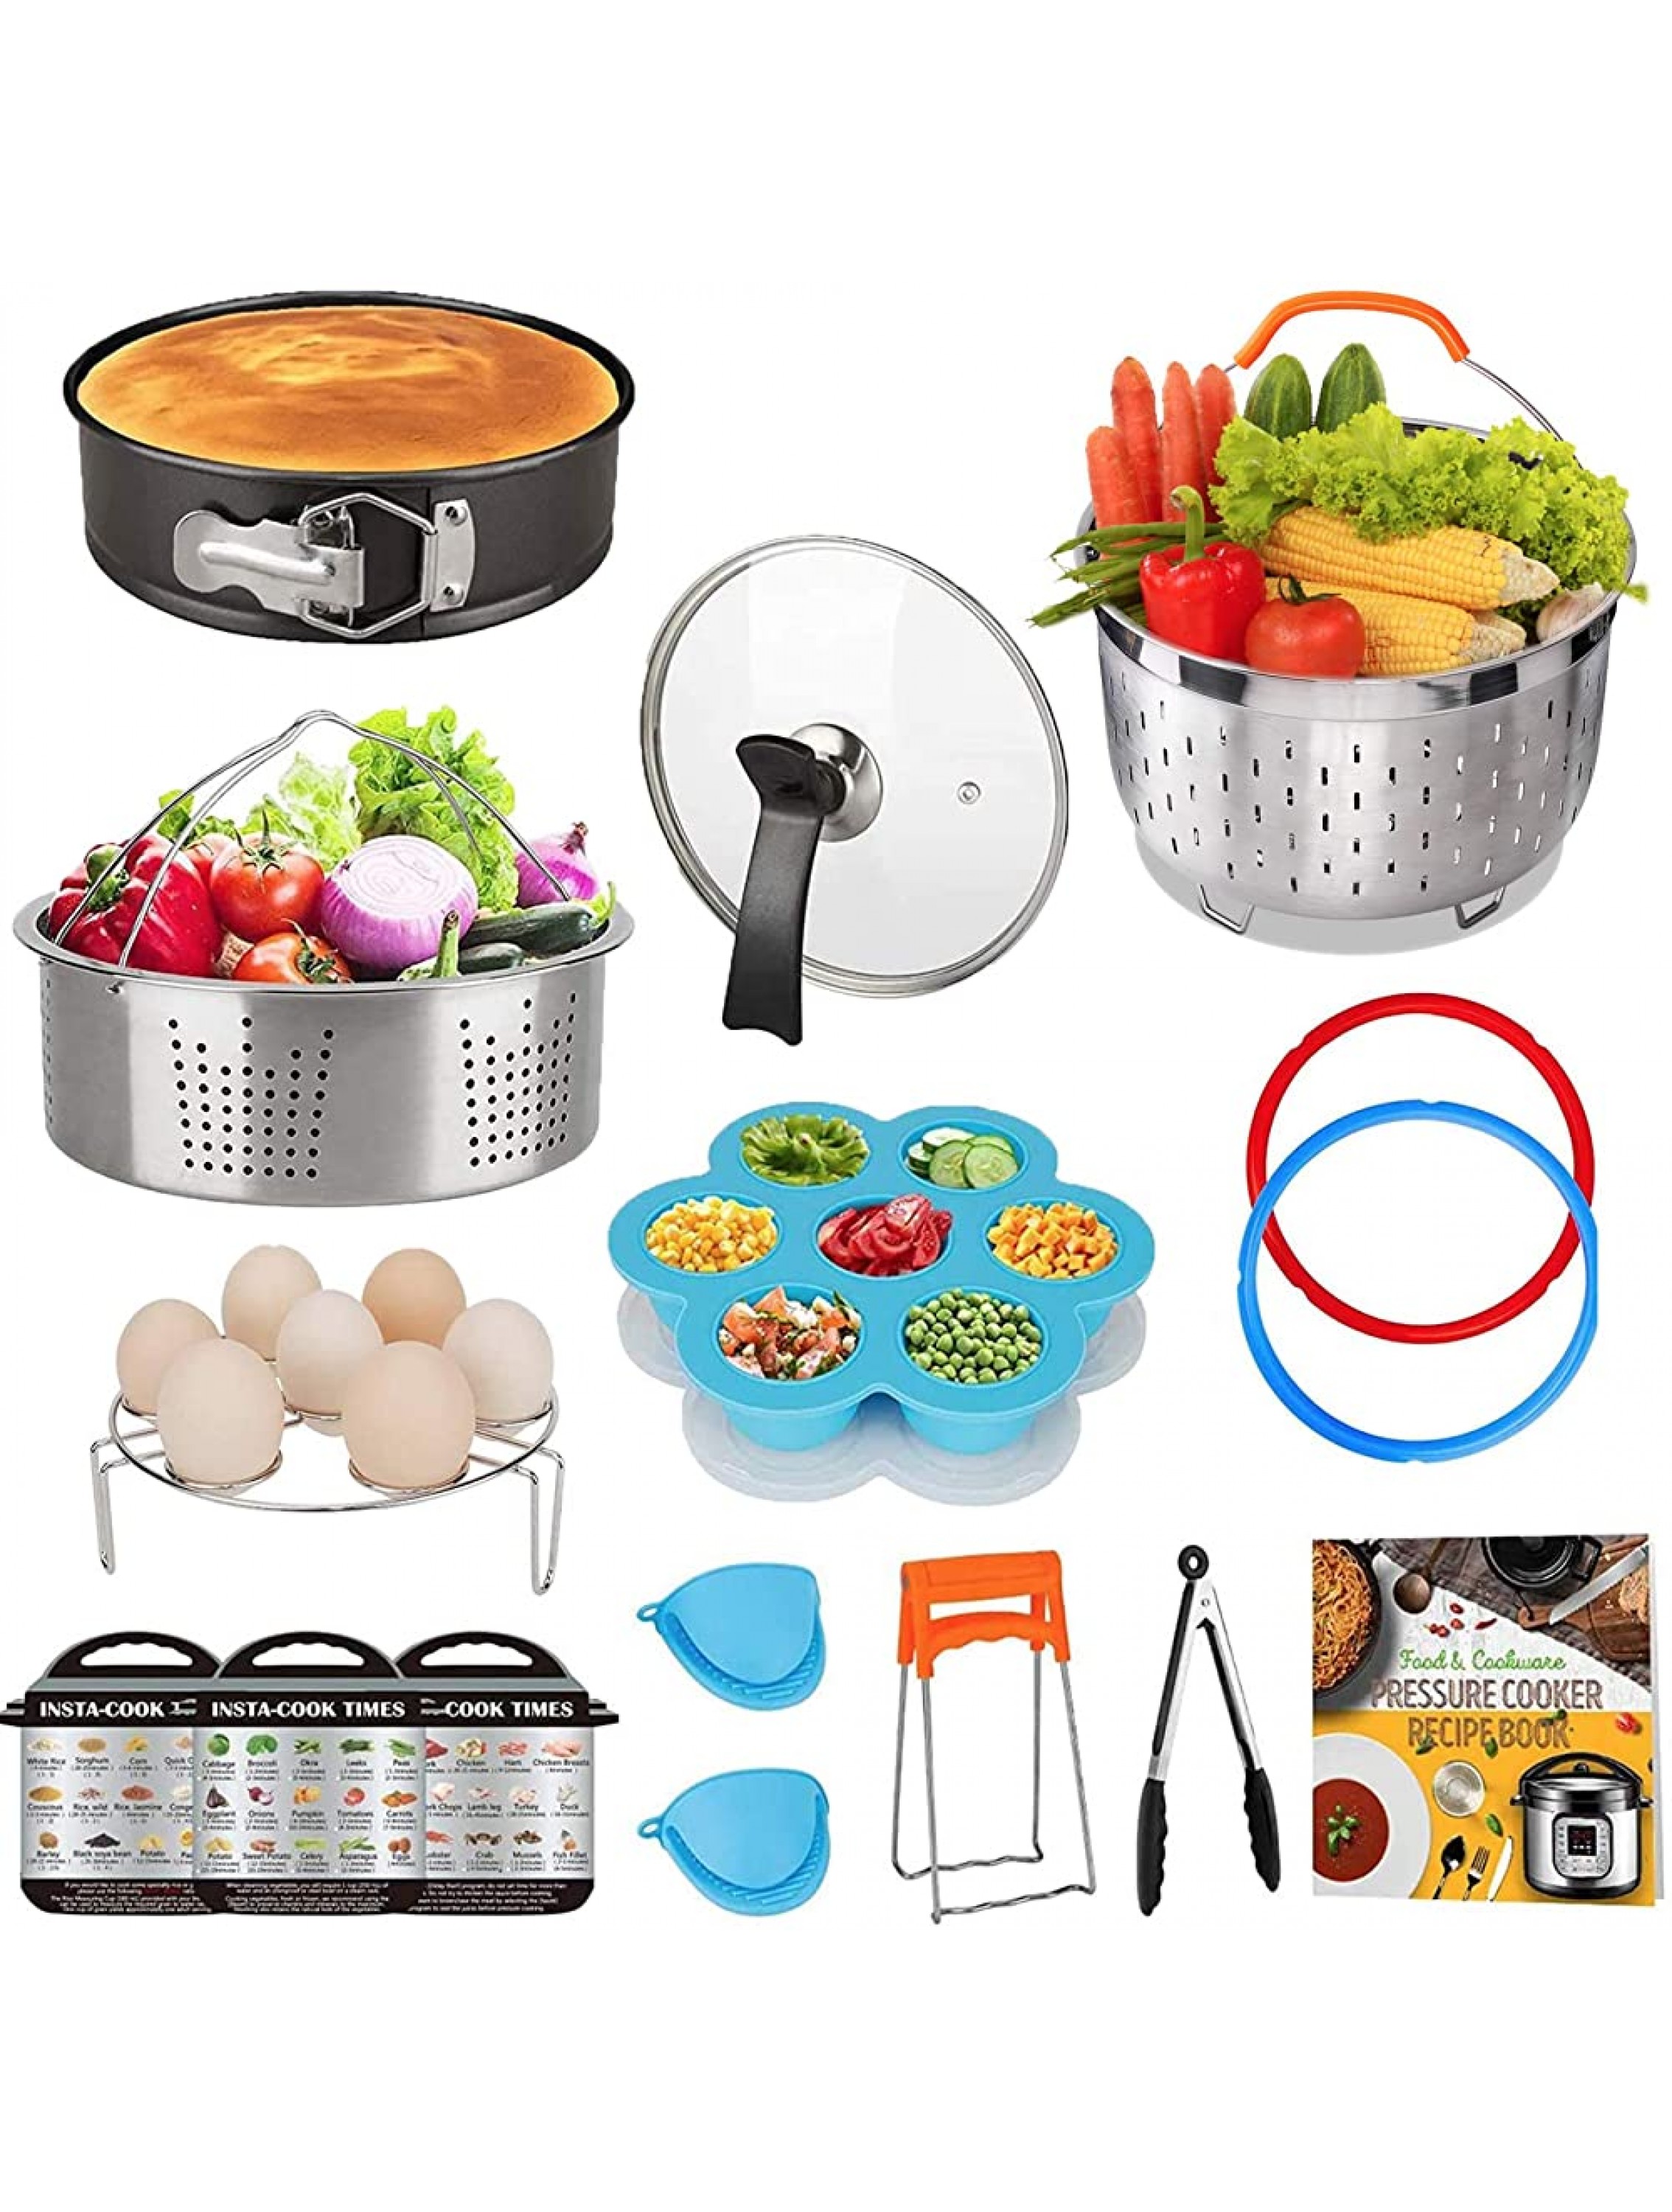 Accessories Set Compatible with 8 Quart Instant Pot Only with Sealing Rings Tempered Glass Lid and Steamer Basket. - BCPTZ52V3